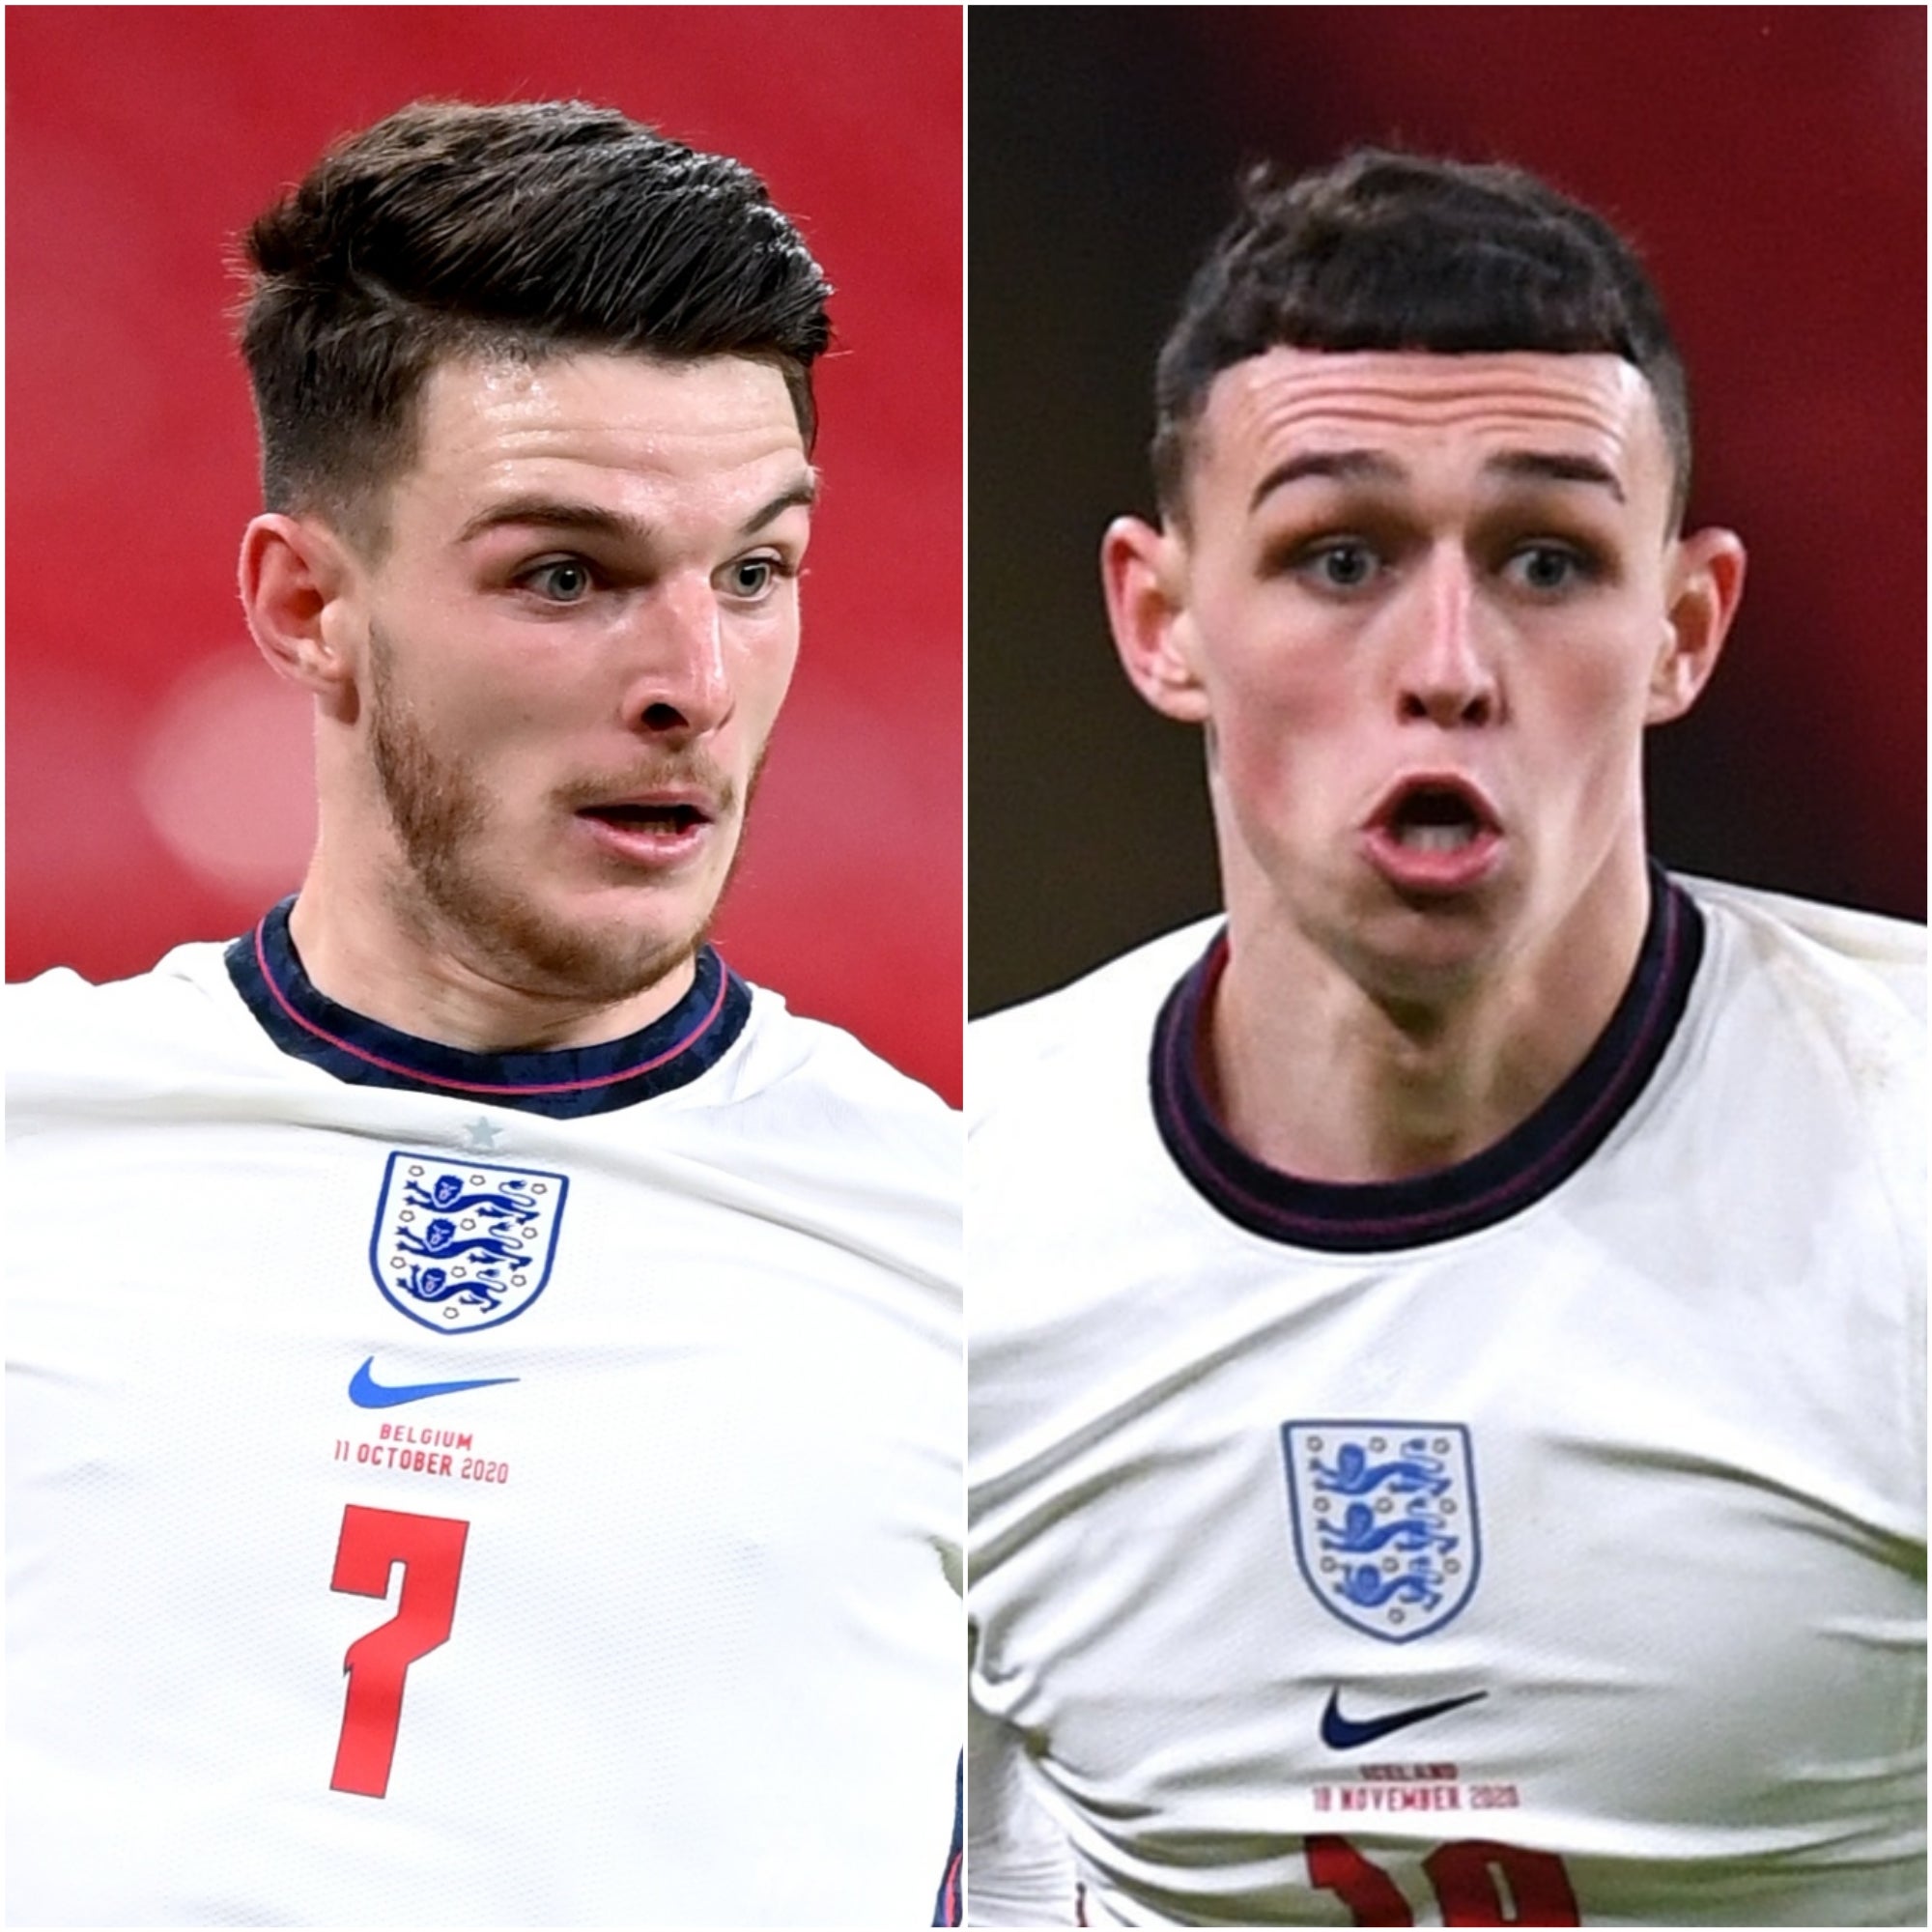 Declan Rice and Phil Foden (Michael Regan/Neil Hall/PA)